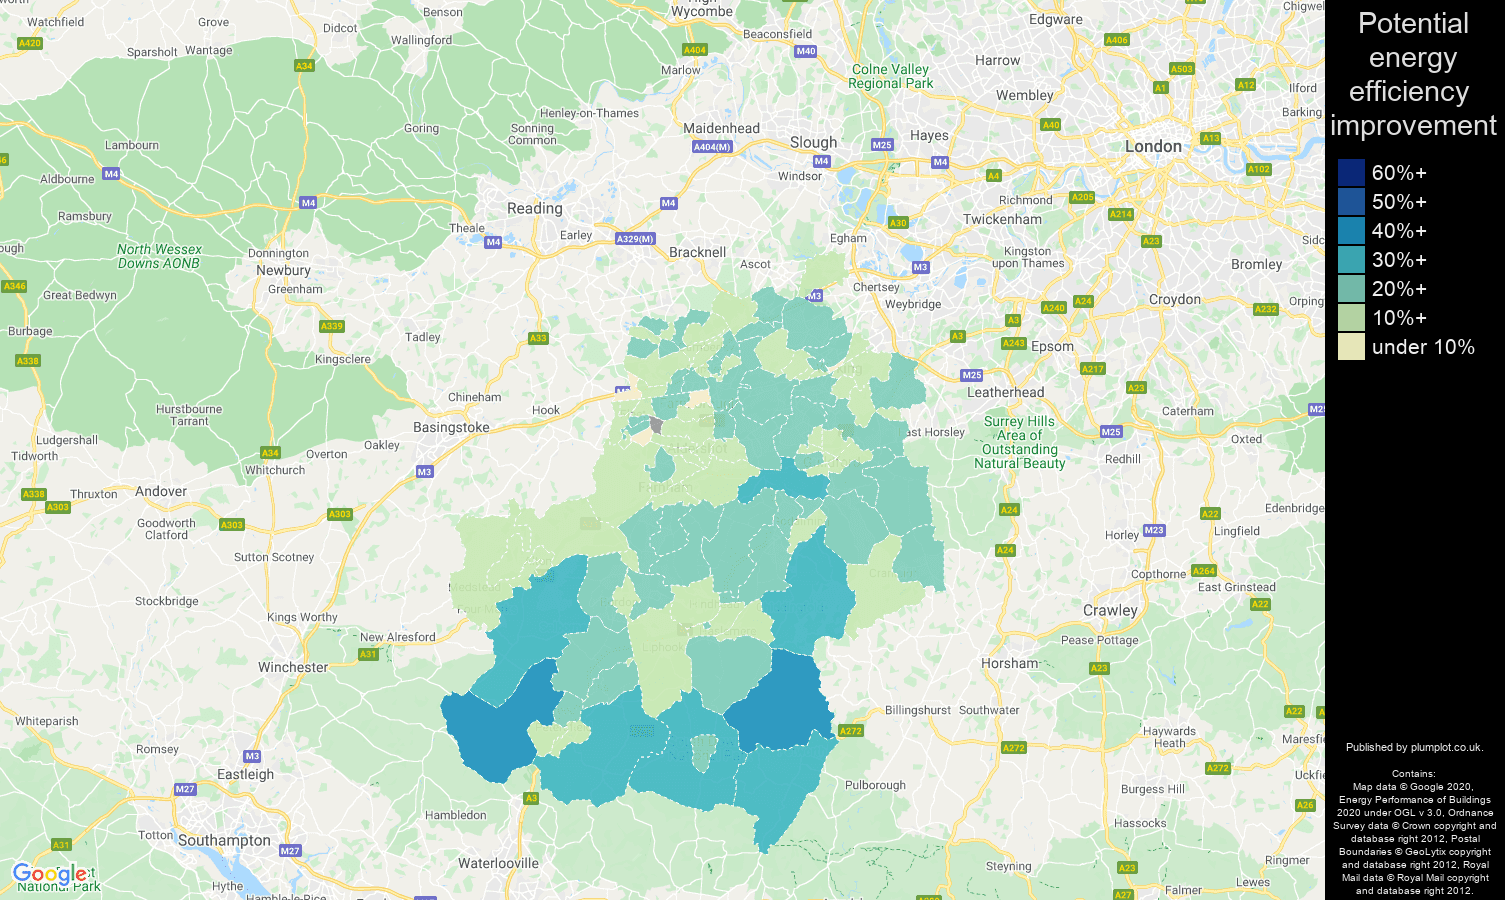 Guildford map of potential energy efficiency improvement of properties